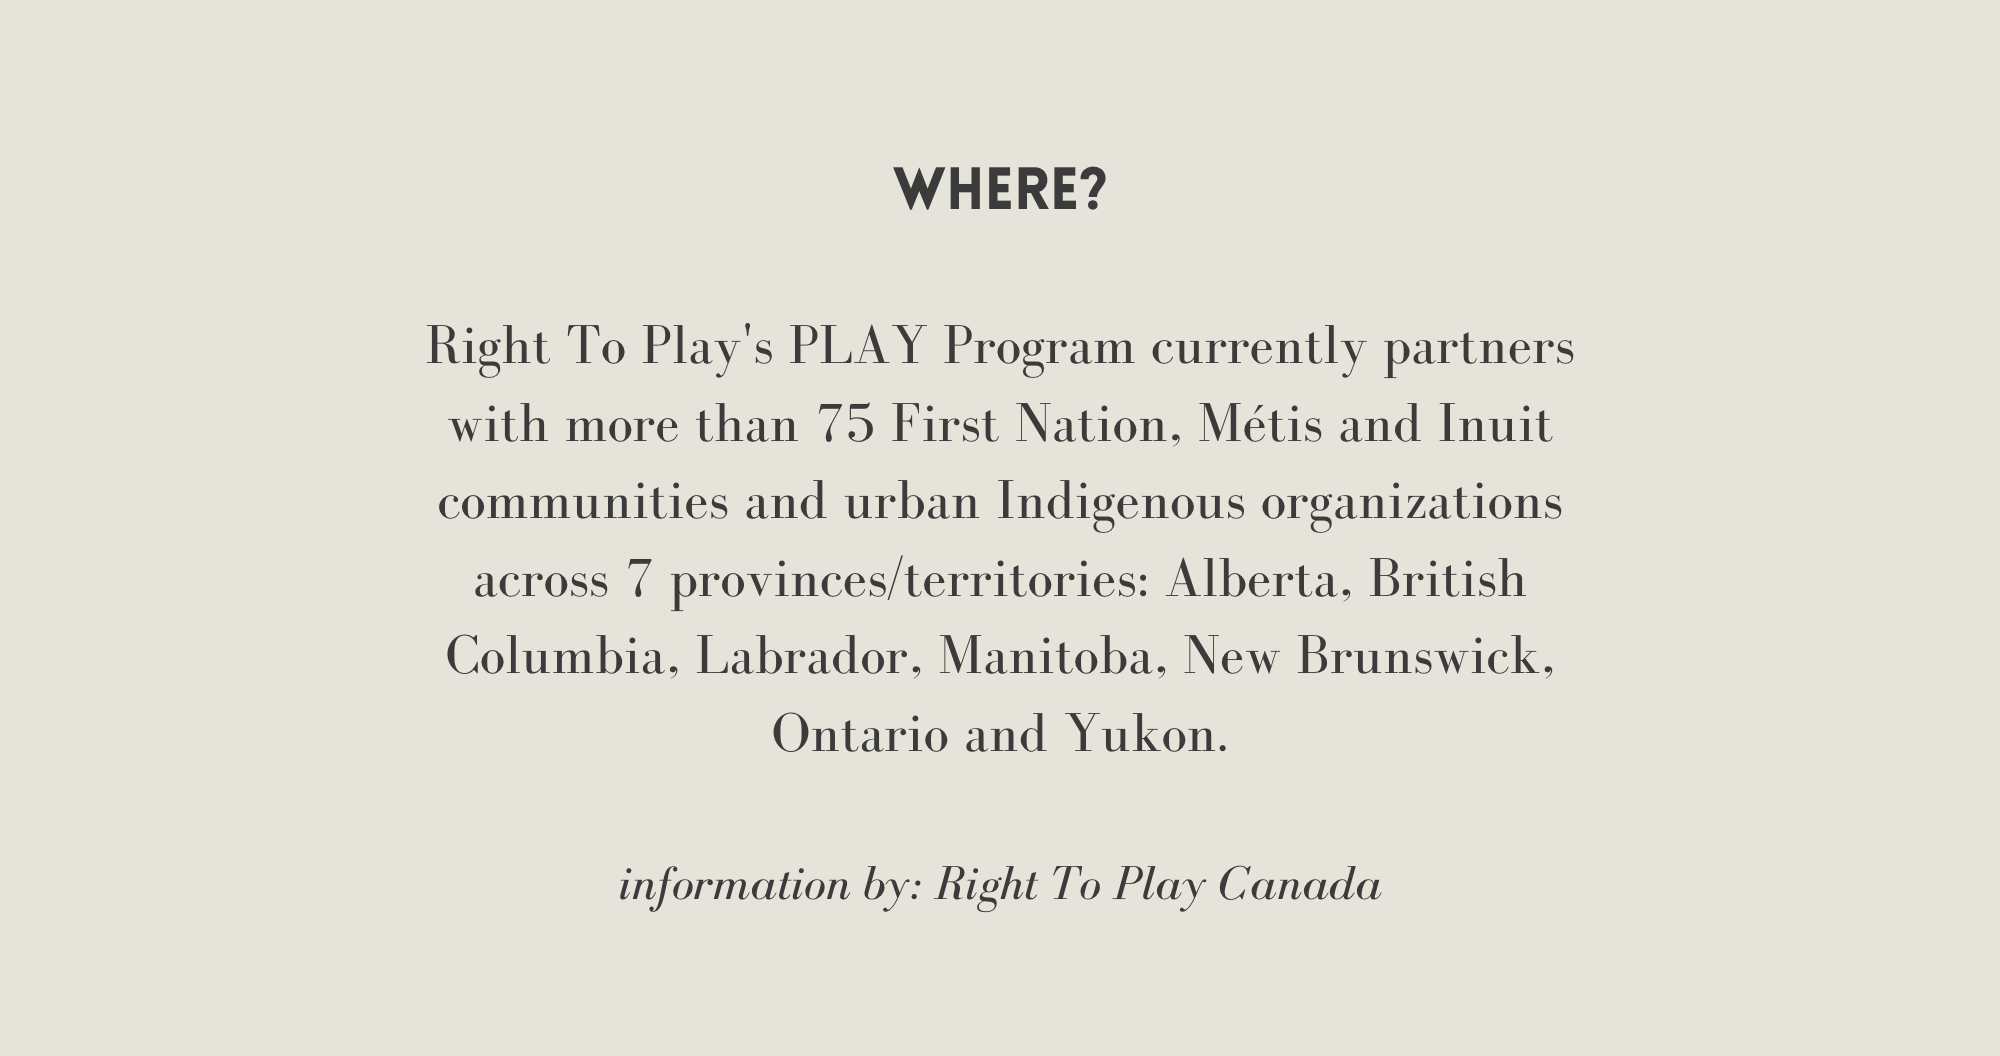 [Where] Right To Play's PLAY Program currently partners with more than 75 First Nation, Métis, Inuit communities and urban Indigenous organizations across 7 provinces/ territories: Alberta, British Columbia, Labrador, Manitoba, NB, ON, and Yukon